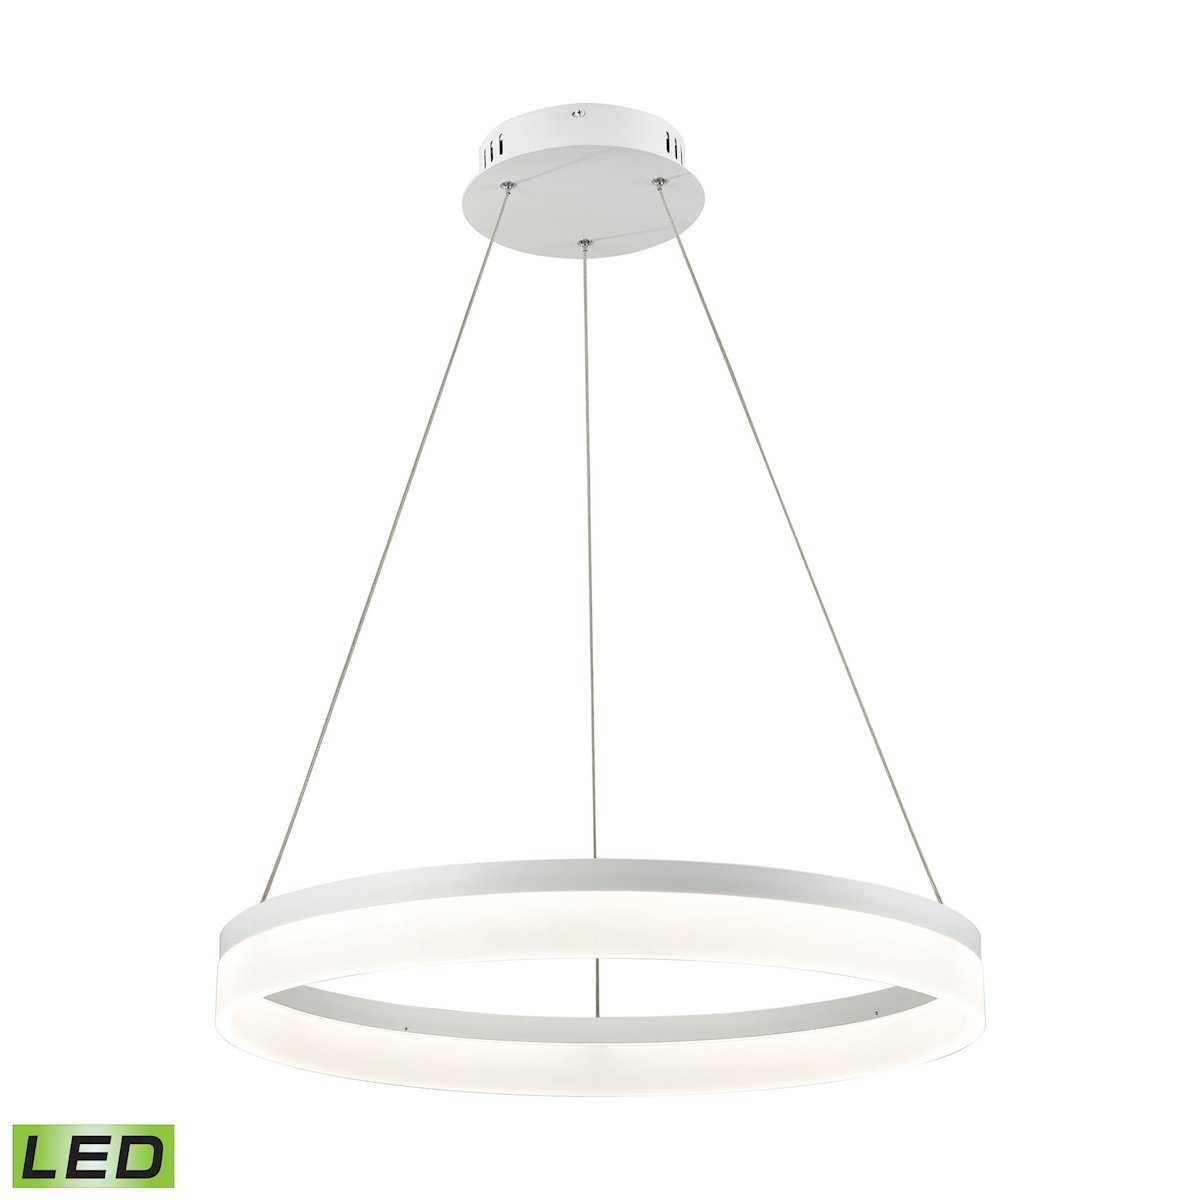 Cycloid 1 Light LED Pendant In Matte White With Acrylic Diffuser - Medium Ceiling Elk Lighting 